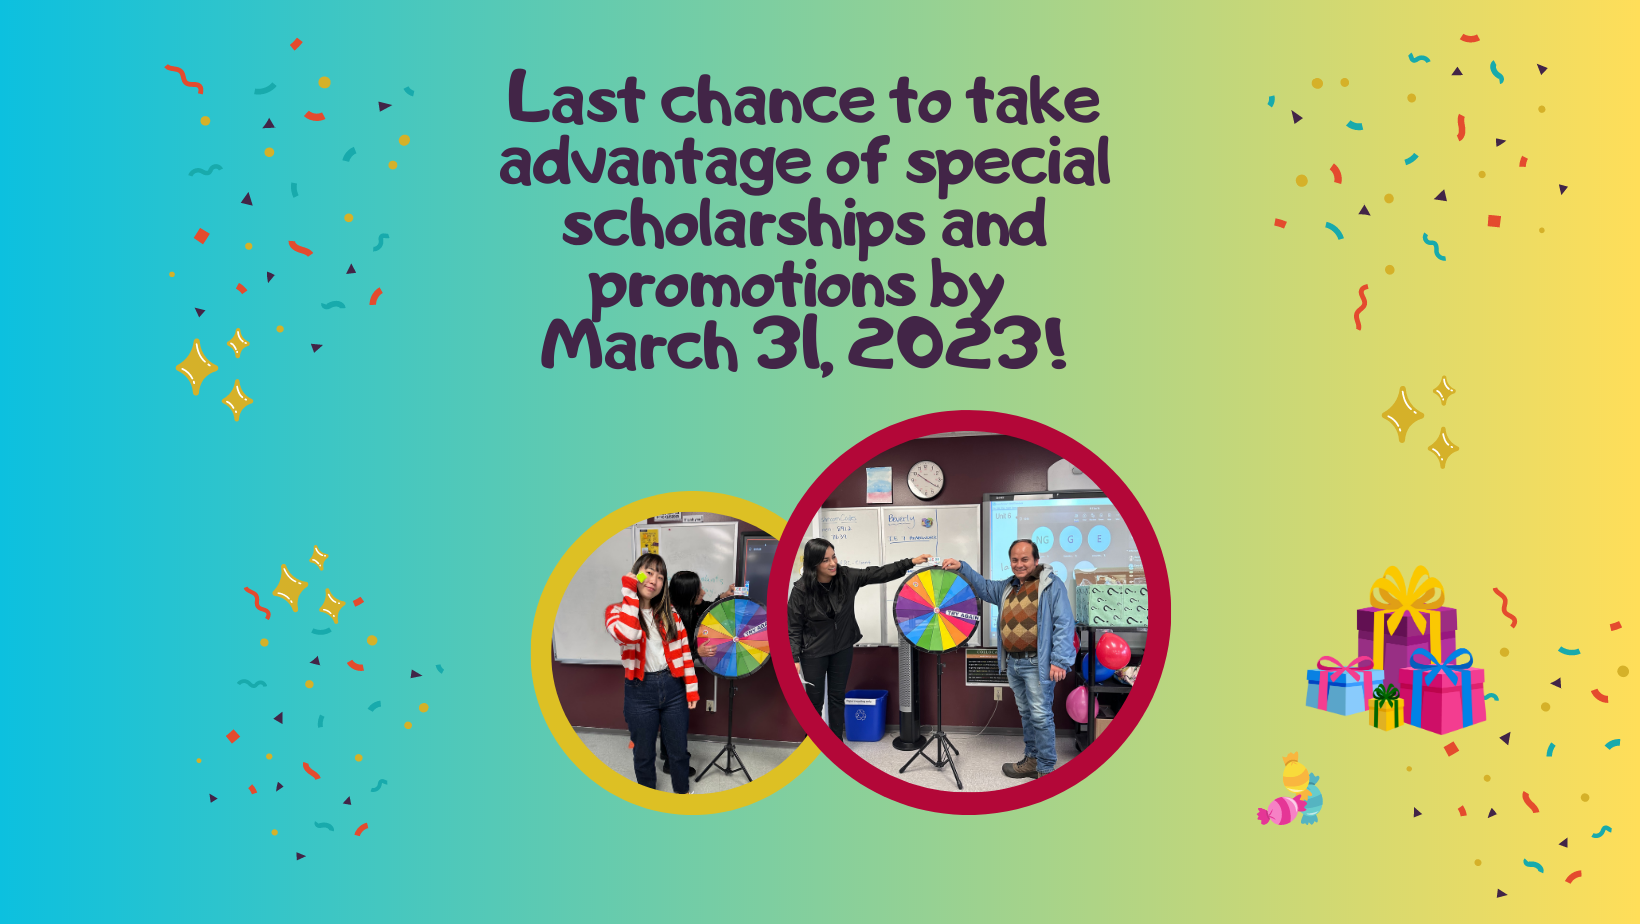 Last chance to take advantage of special scholarships and promotions by March 31, 2023!